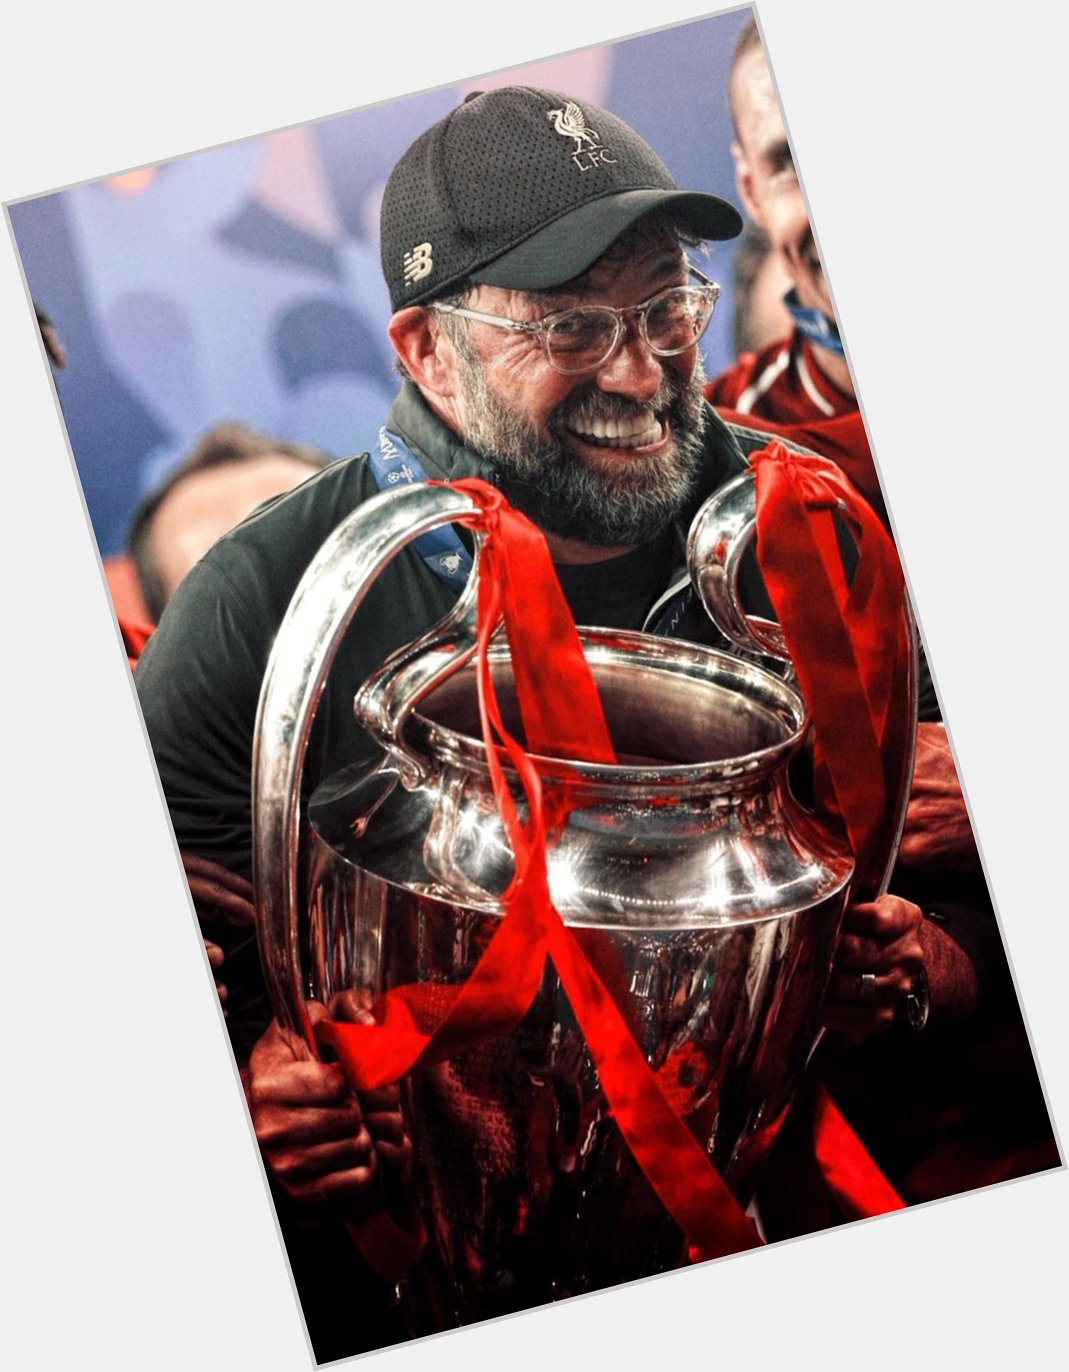 Happy birthday to the best manager in the whole damn world, the main man, Jurgen Klopp! 